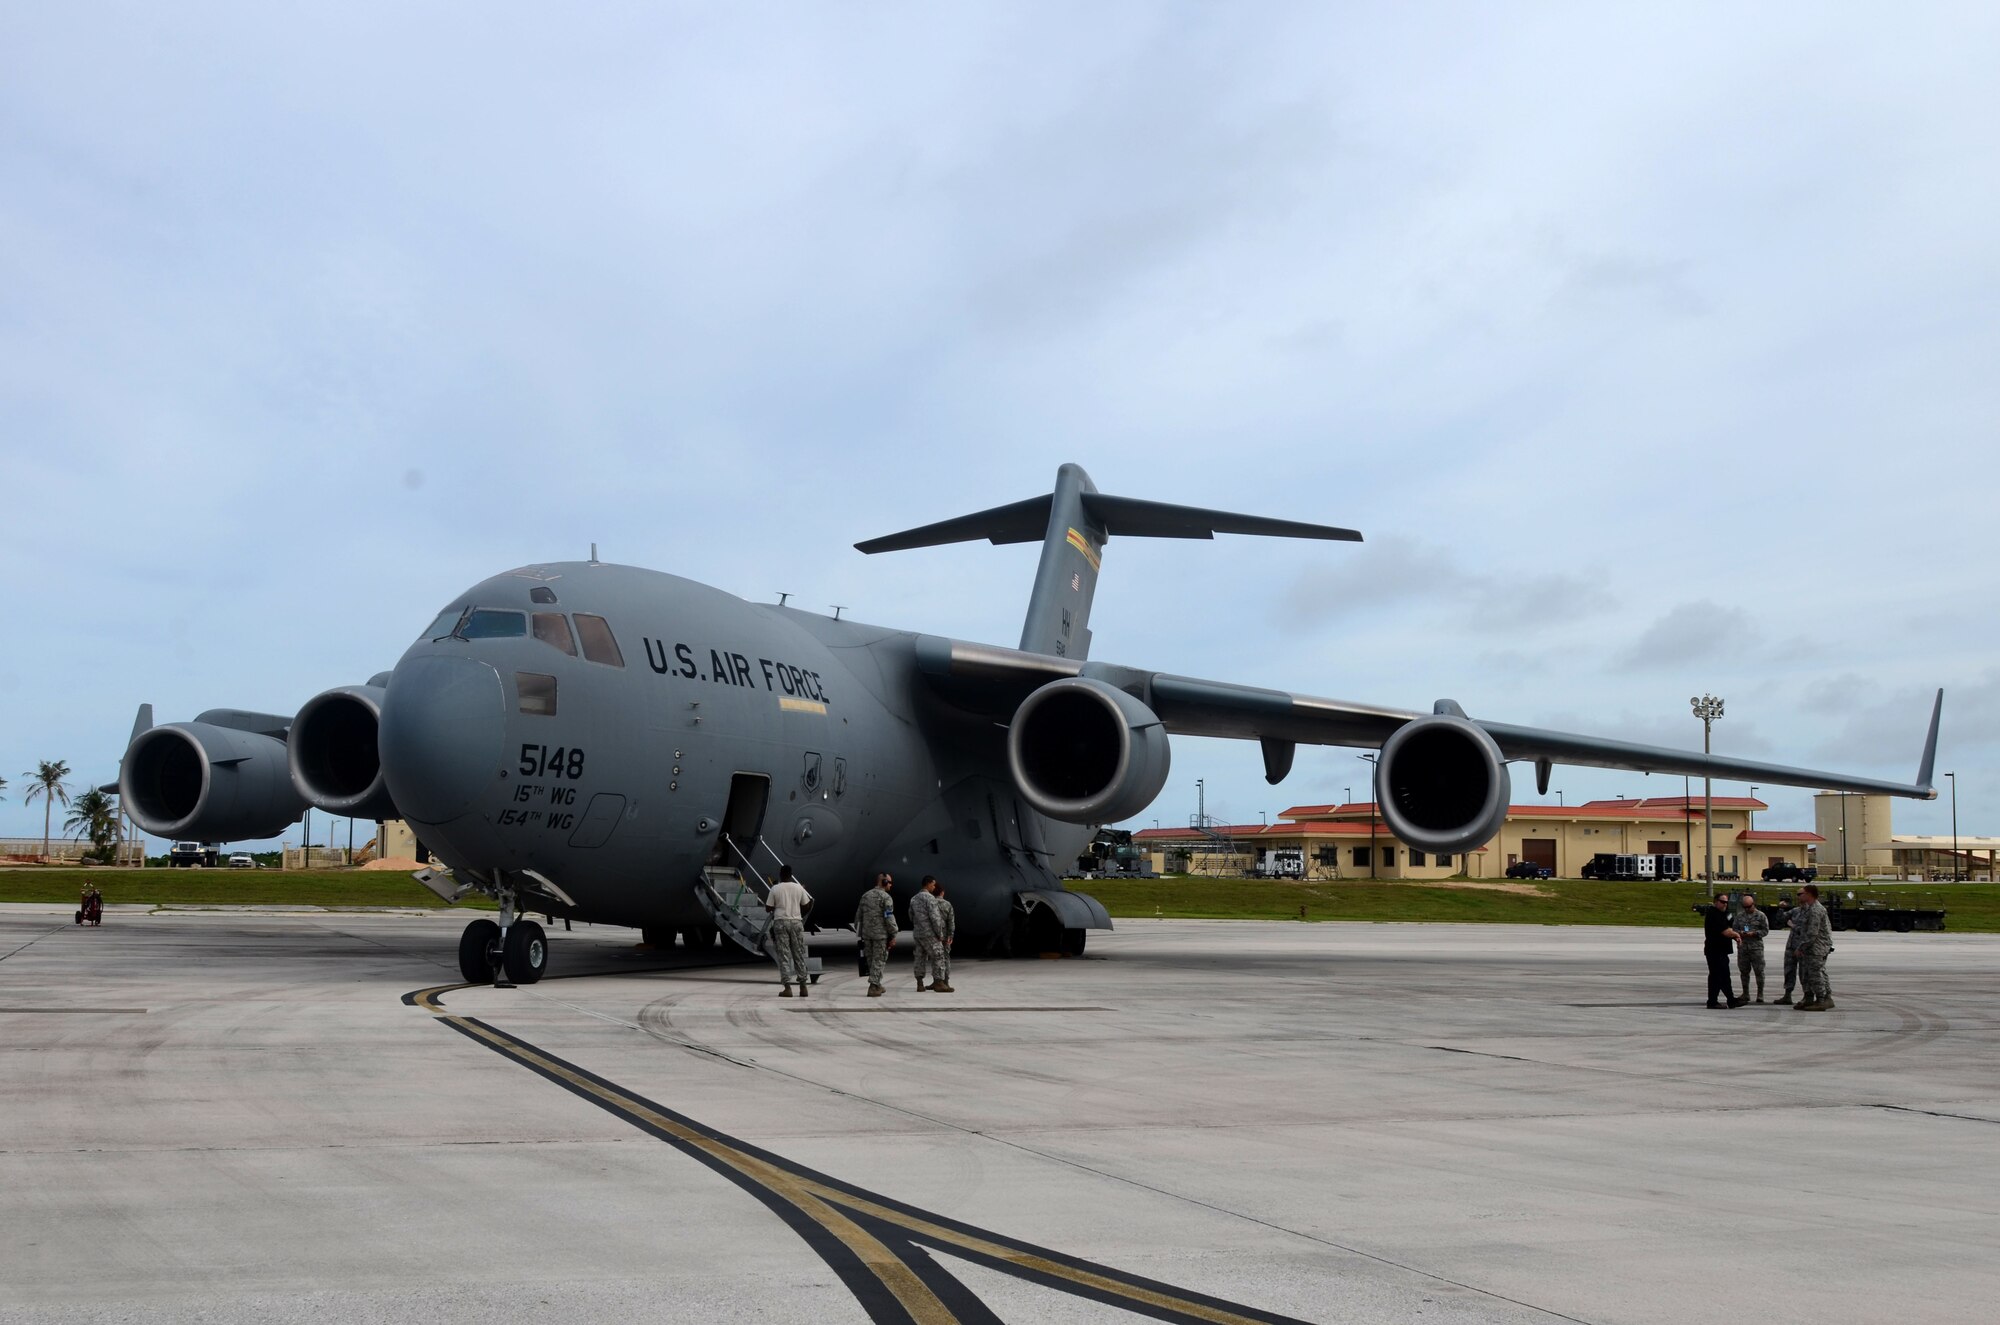 A C-17 Globemaster III assigned to the Hawaii Air National Guard at Joint Base Pearl Harbor-Hickam, Hawaii, arrives at Andersen Air Force Base, Guam, July 15, 2015, after evacuating more than 125 Department of Defense members from Wake Island in preparation for potential surges caused by Typhoon Halola. An evacuation mission such as this highlights Pacific Air Force’s flexibility to generate air response quickly across the theater, which is a key component to air power. The DoD personnel are part of the Pacific Air Forces Regional Support Center and 11th Air Force mission on Wake Island, which is a strategic location within the Pacific and also a divert airfield for overseas flights. (U.S. Air Force photo by Airman 1st Class Alexa A. Henderson/Released)